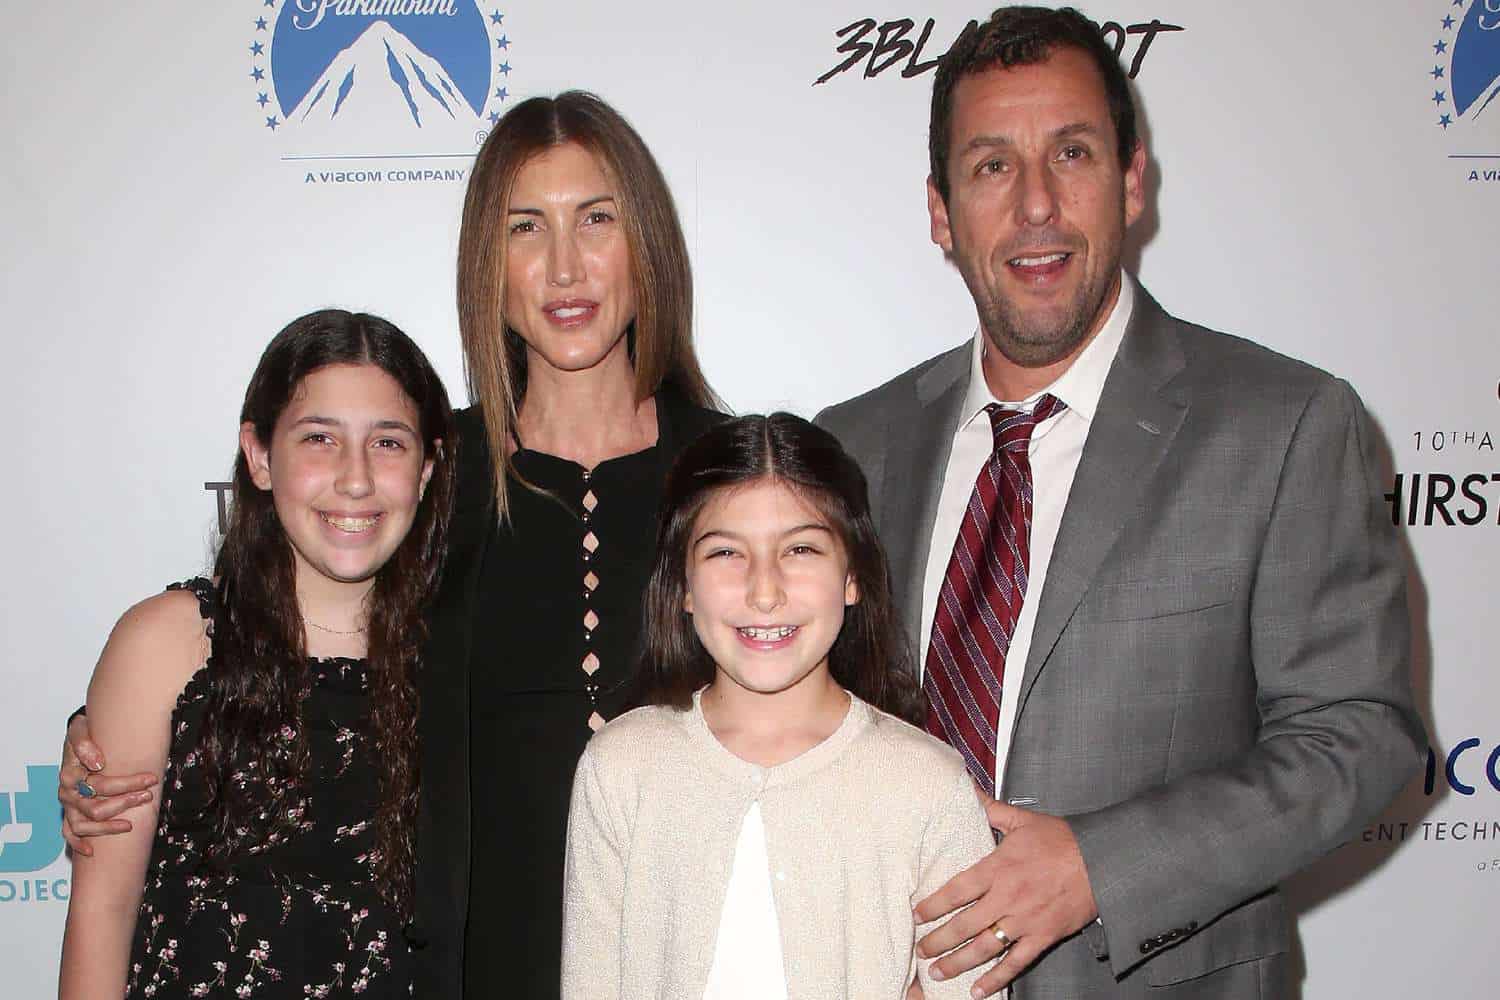 The entire Sandler family in one frame (Credits: People)